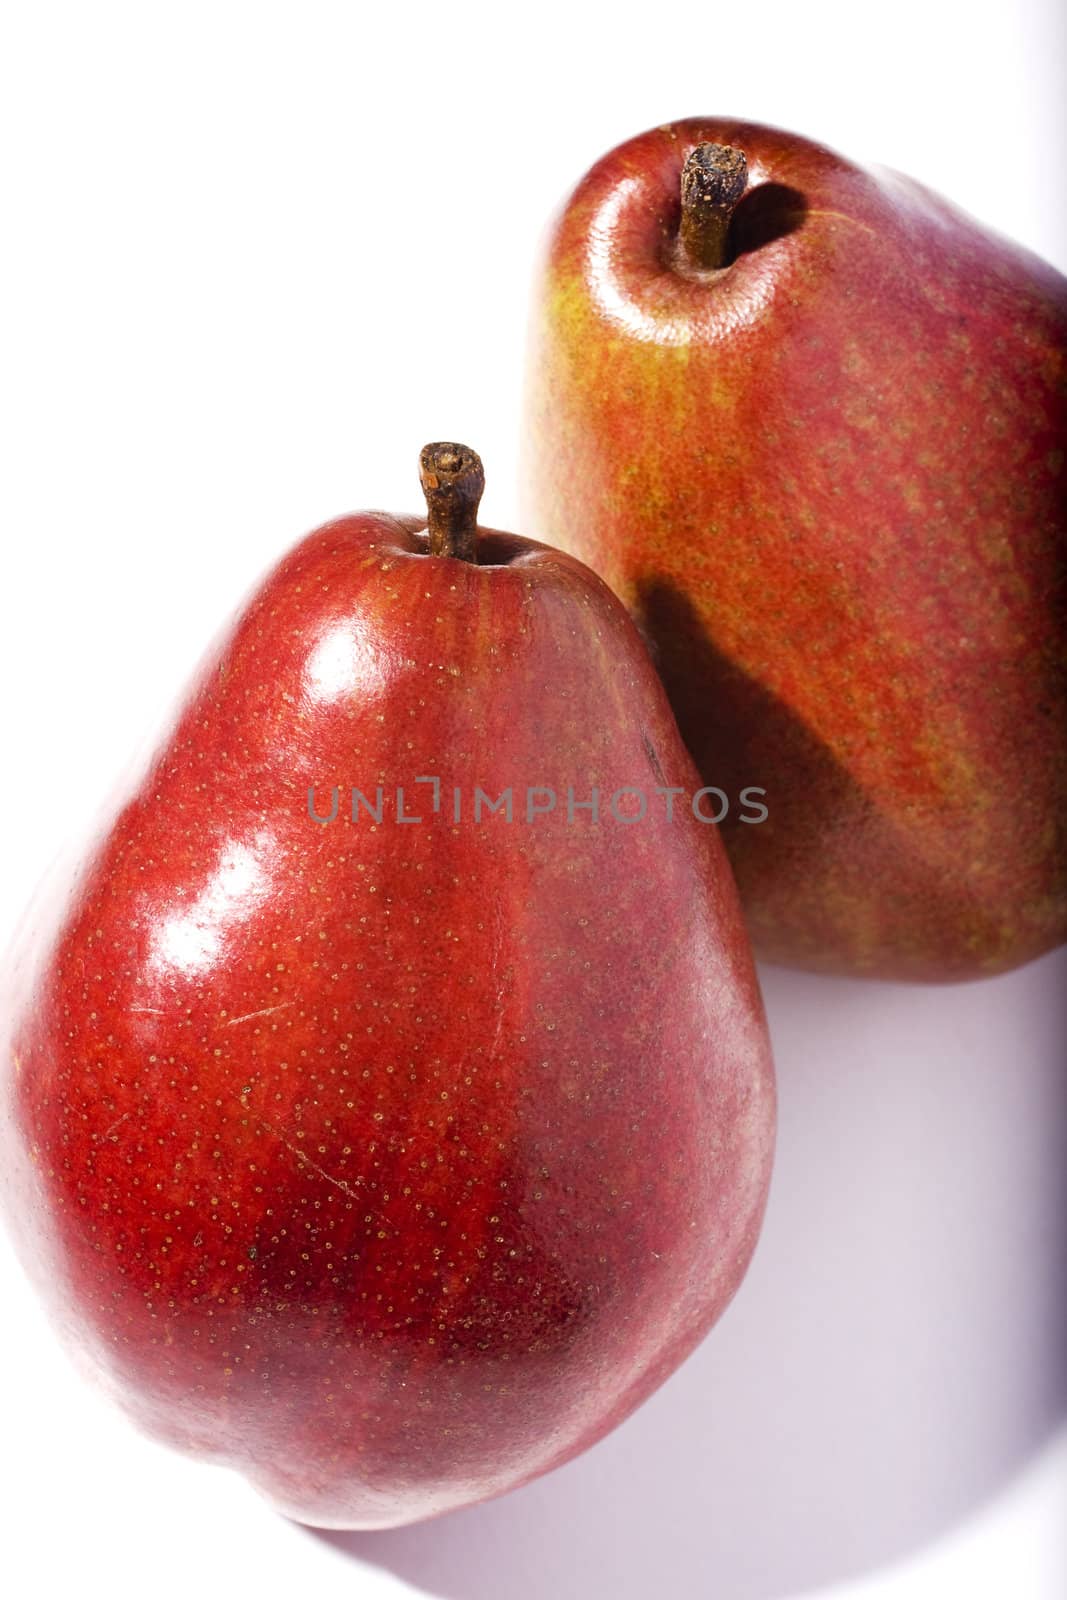 it is there of Red apples on background